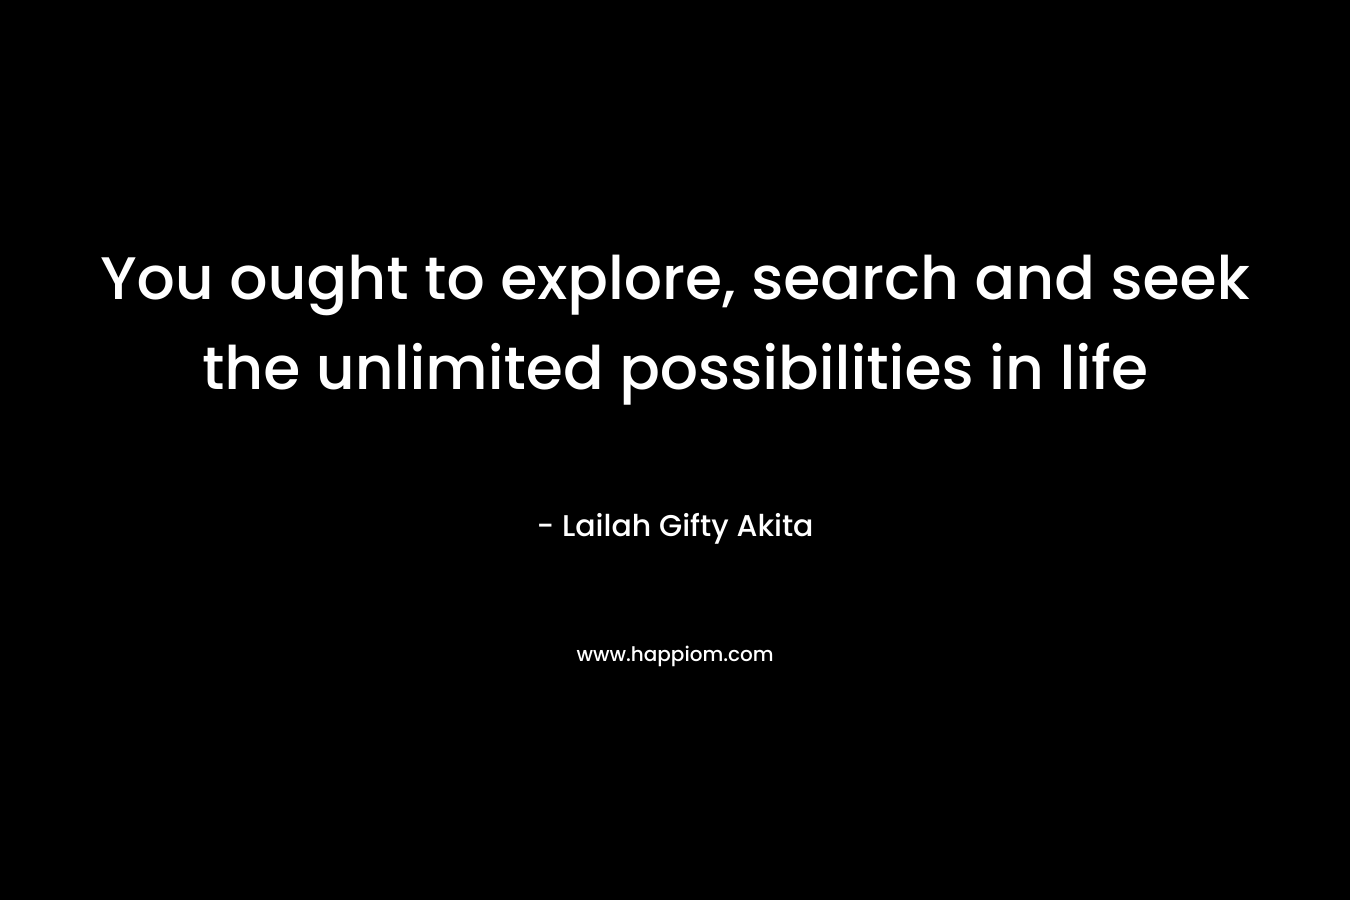 You ought to explore, search and seek the unlimited possibilities in life